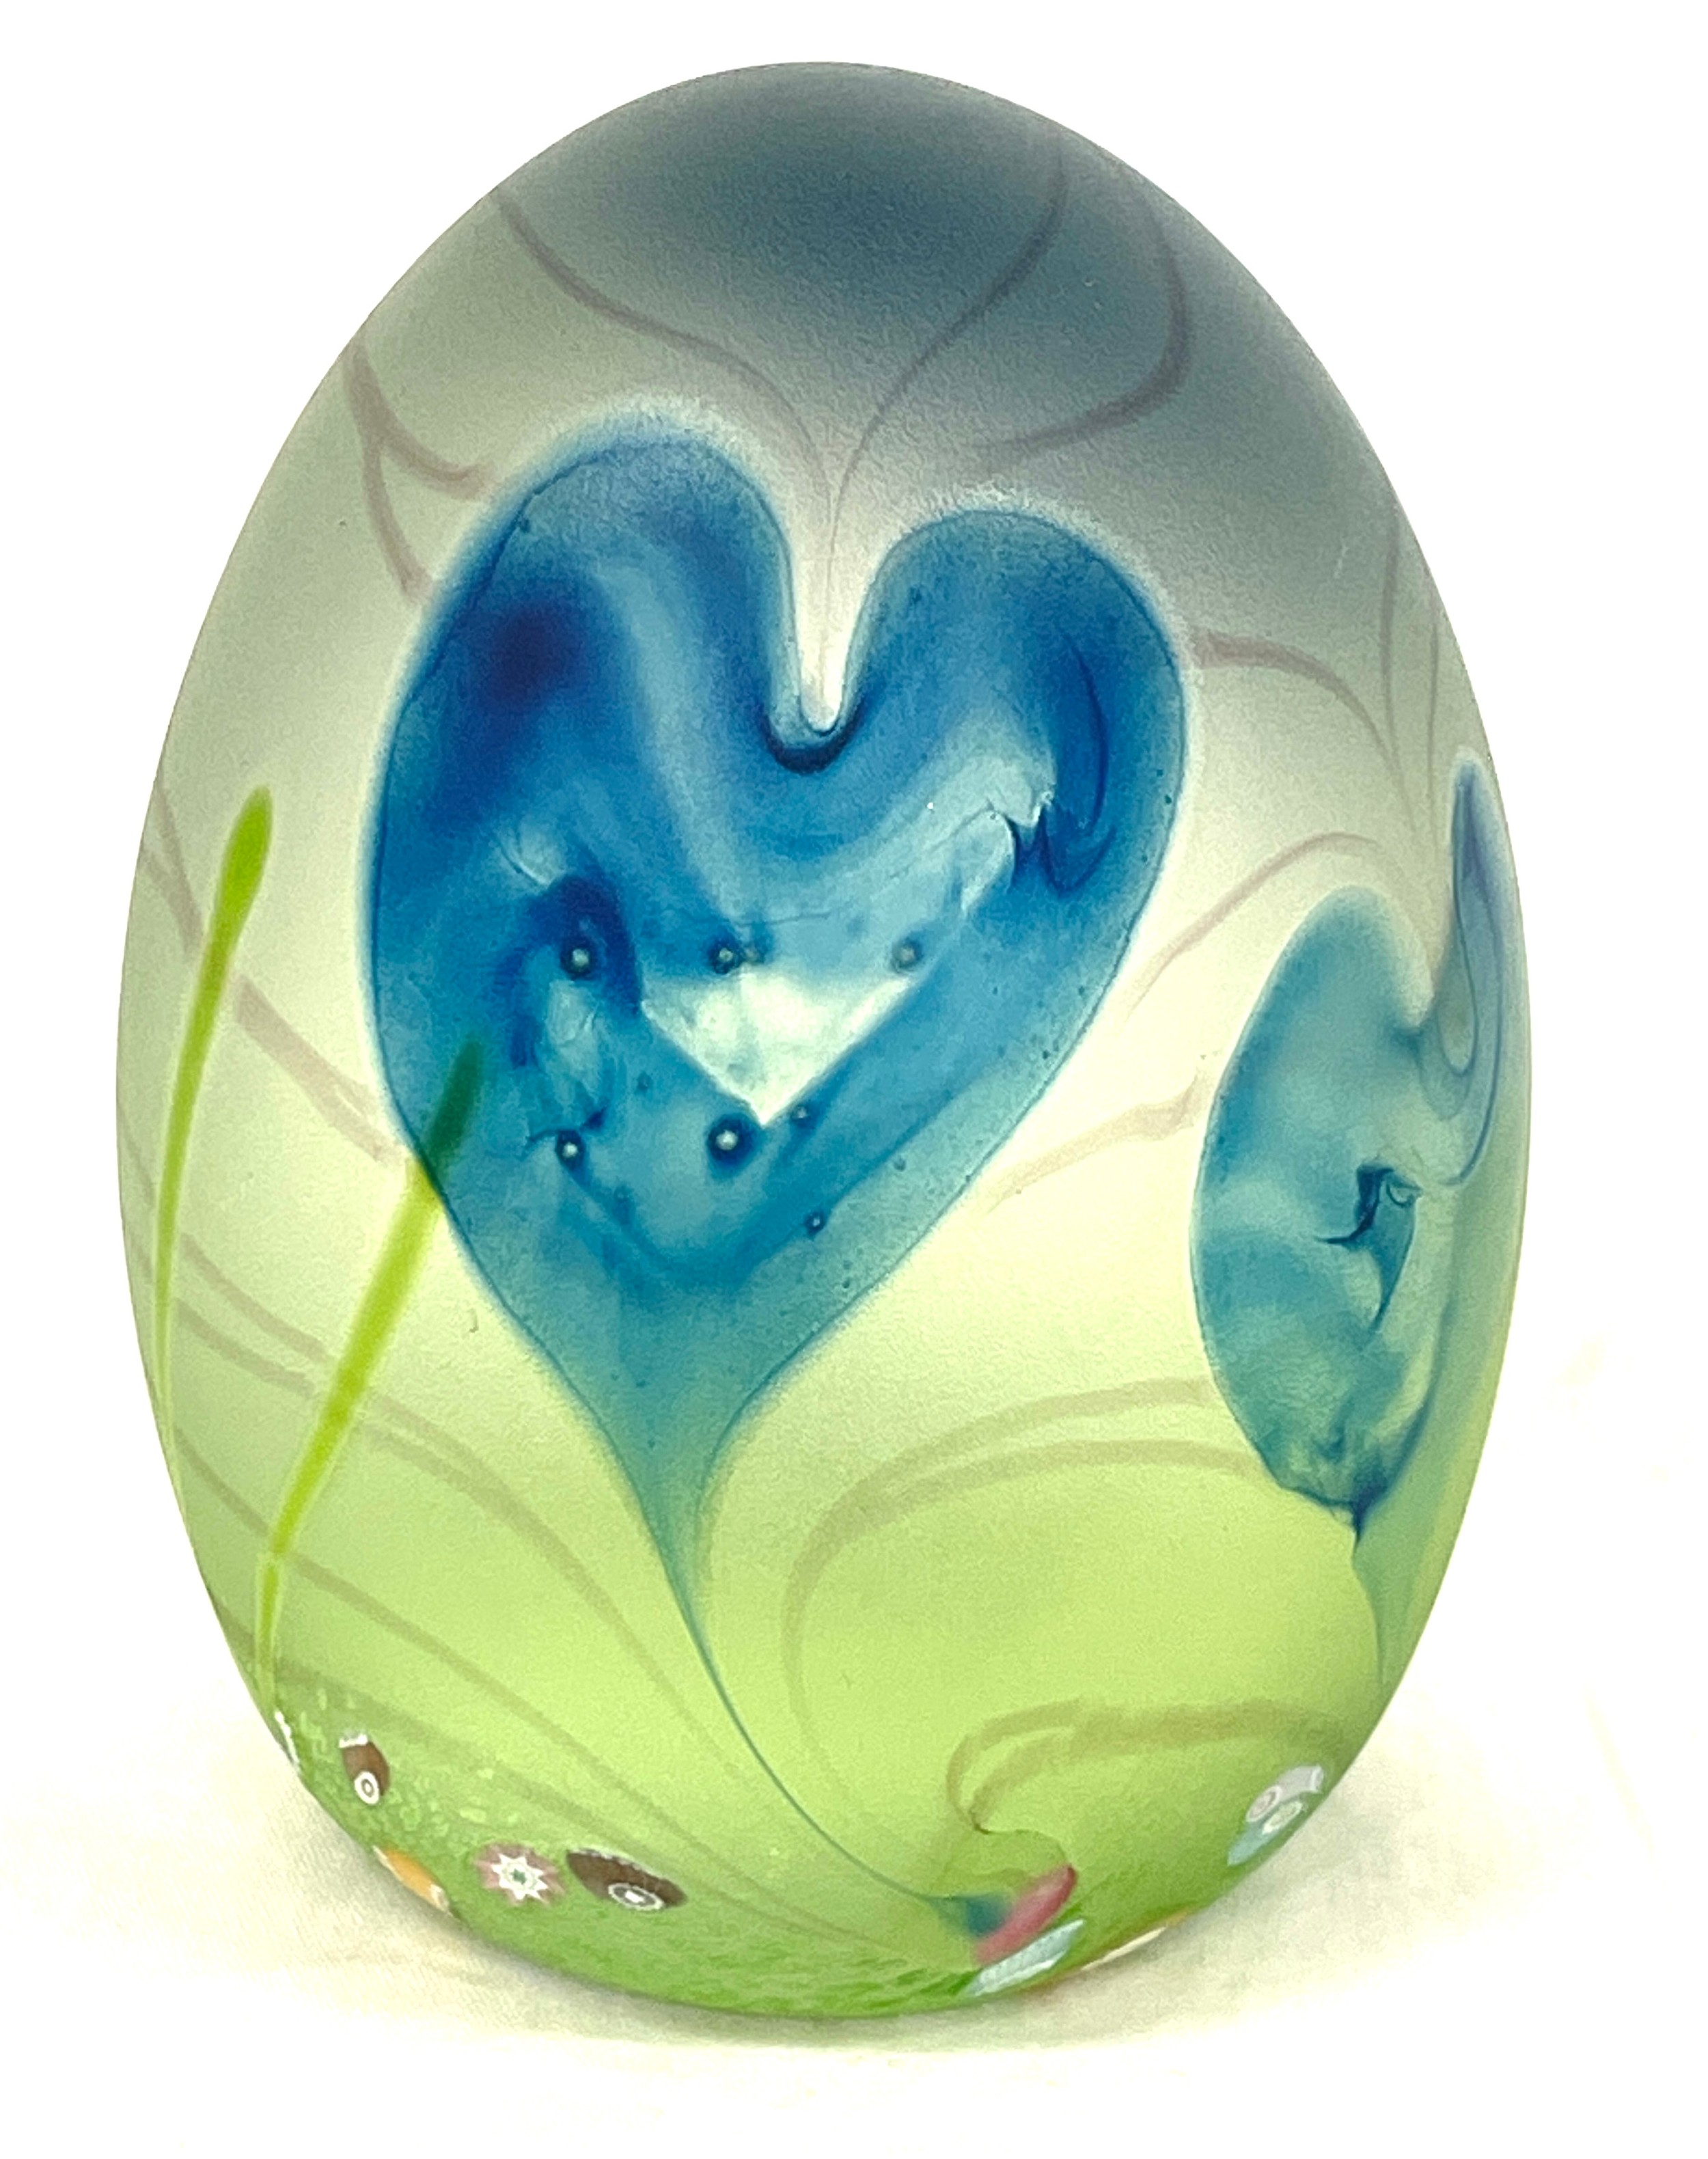 Signed satin glass Caithness Scotland Juliet paperweight, limited edition 12/500